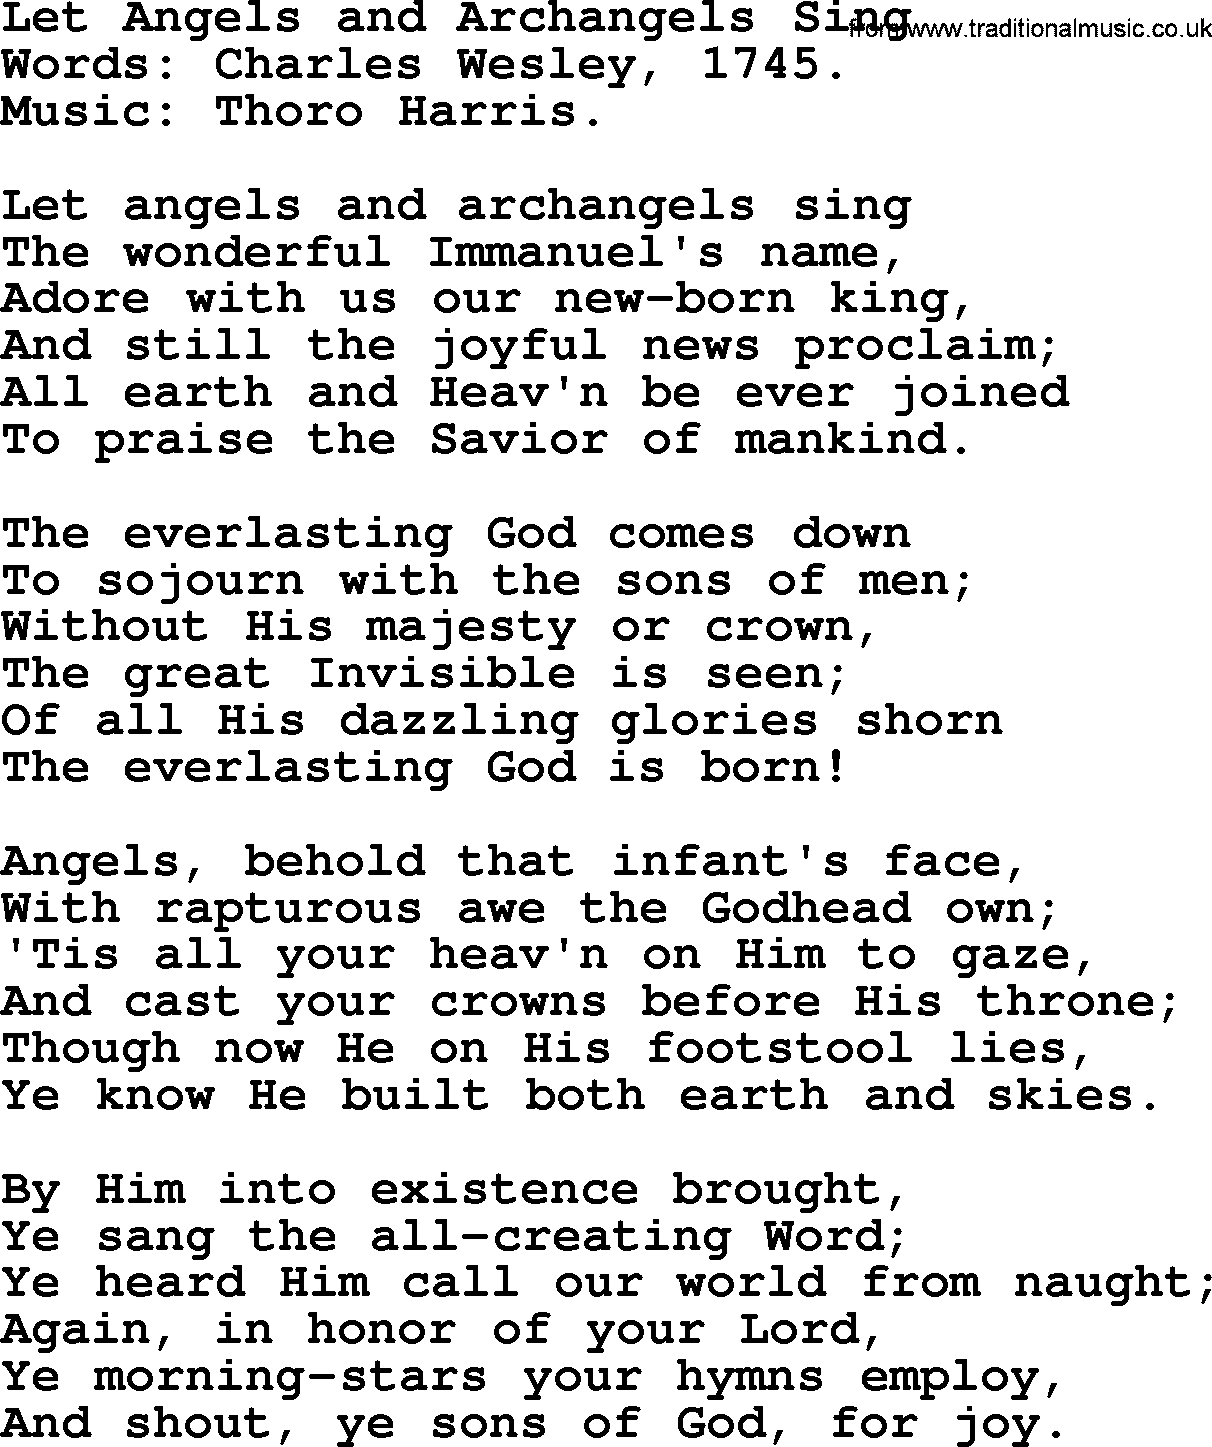 Christmas Hymns, Carols and Songs, title: Let Angels And Archangels Sing, lyrics with PDF